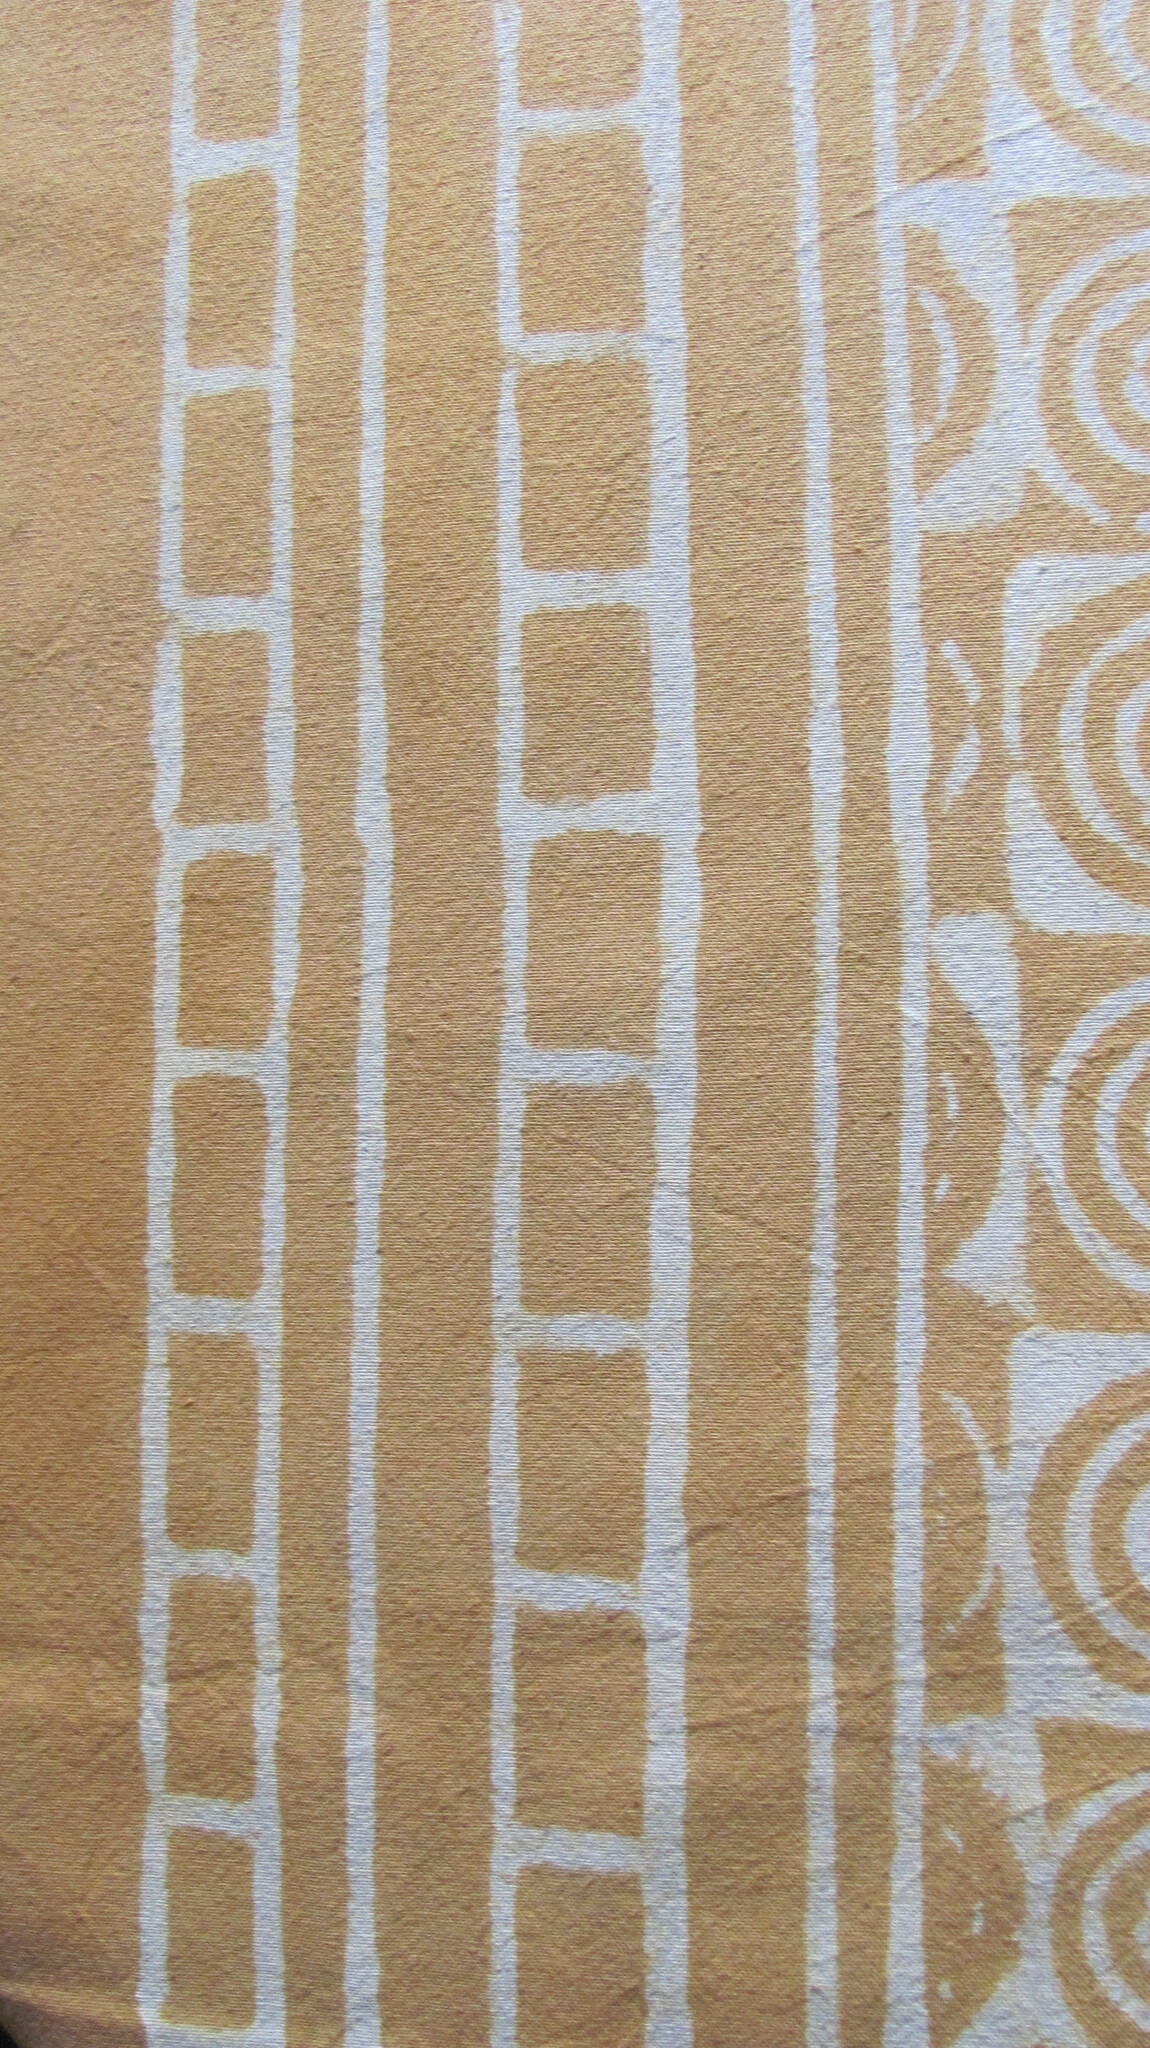 Bed spread single, 100% cotton, hand printed